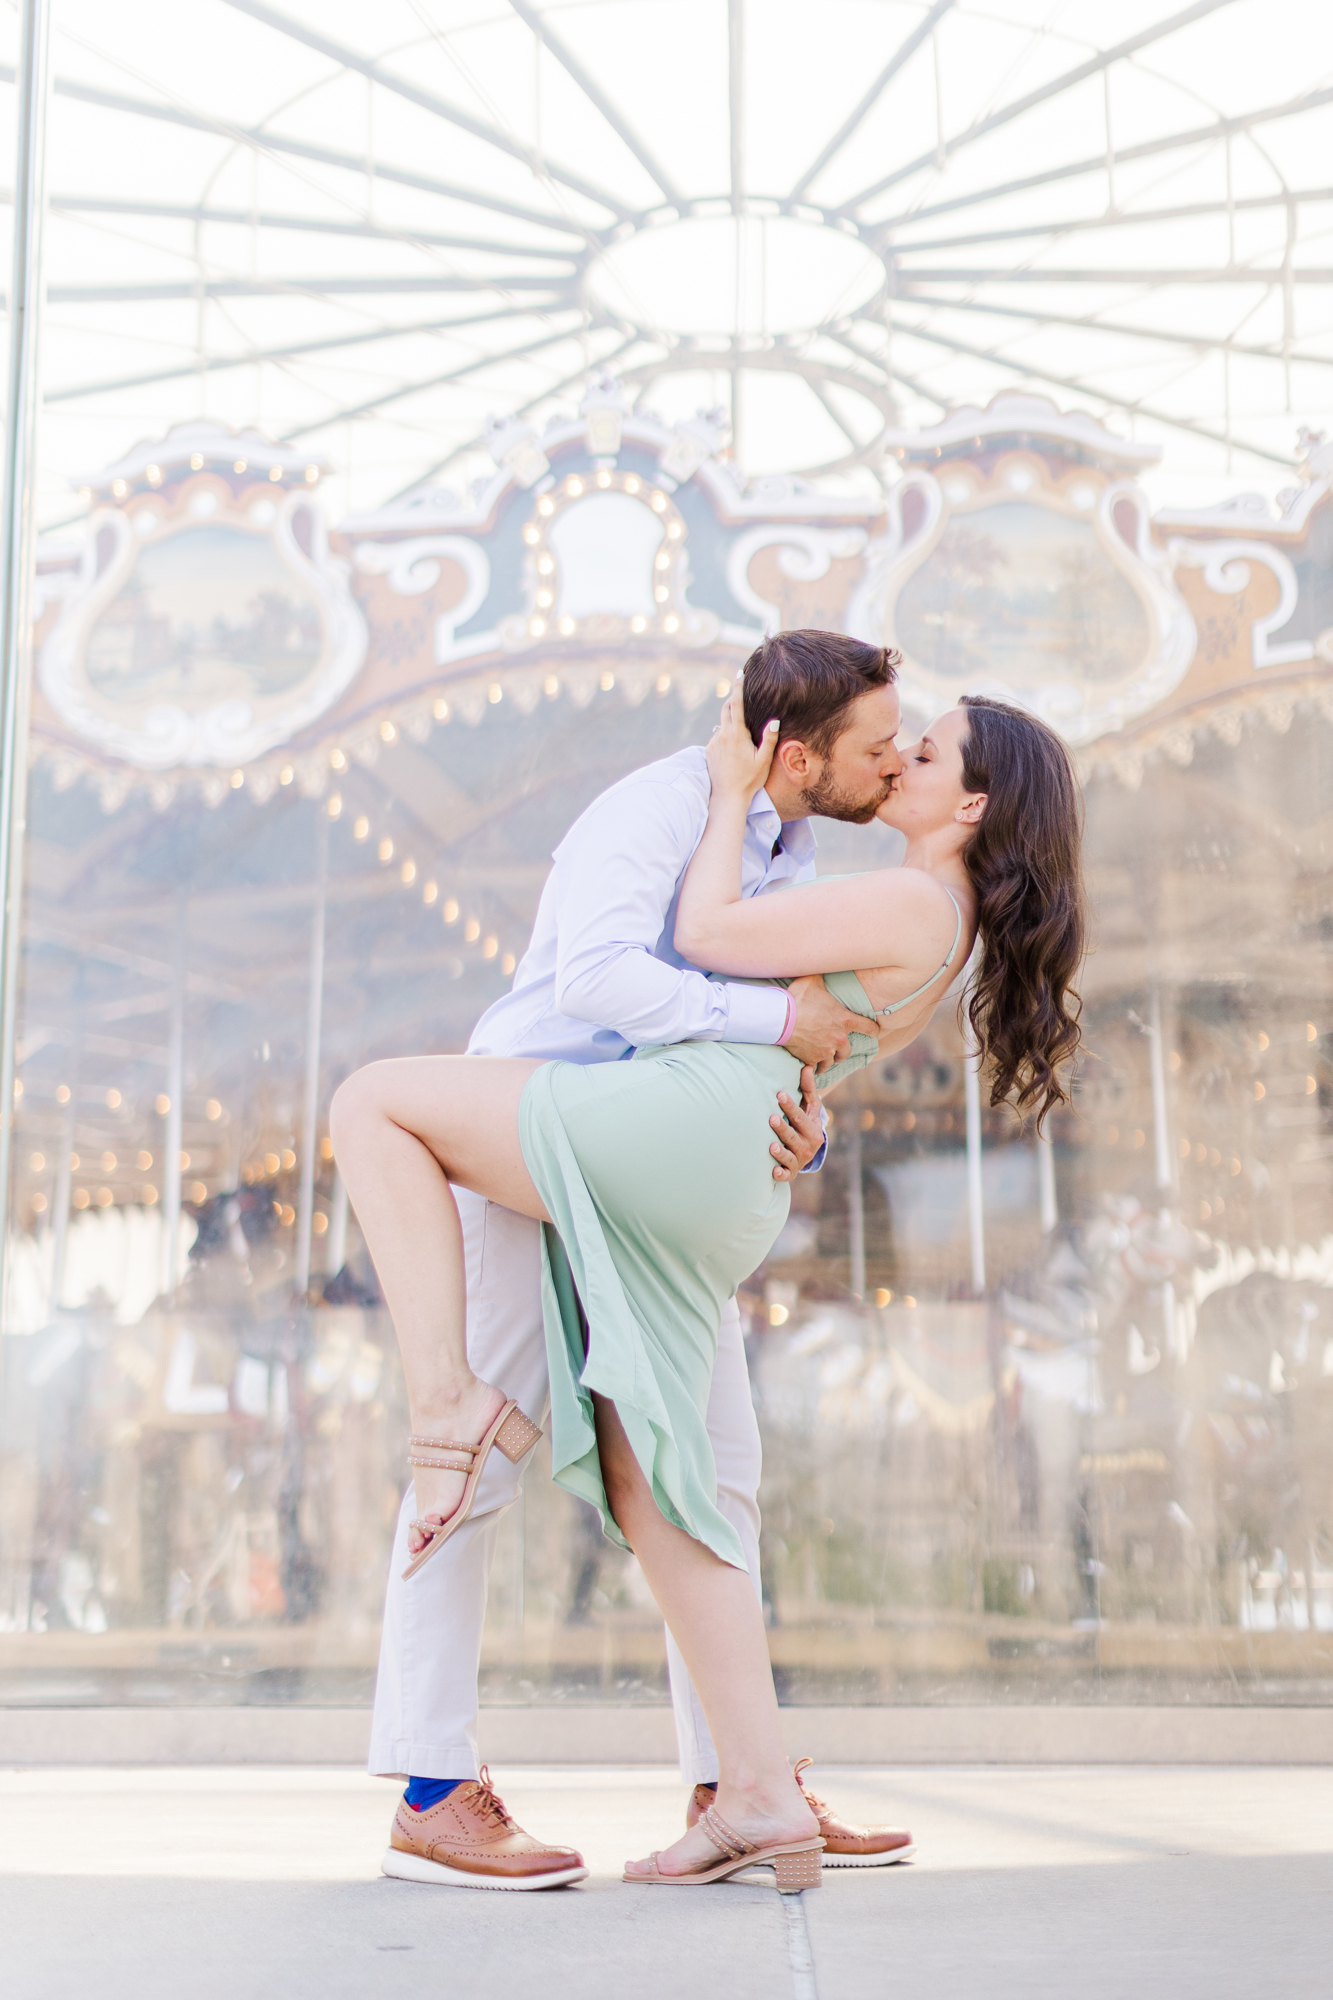 Special DUMBO Engagement Session in New York